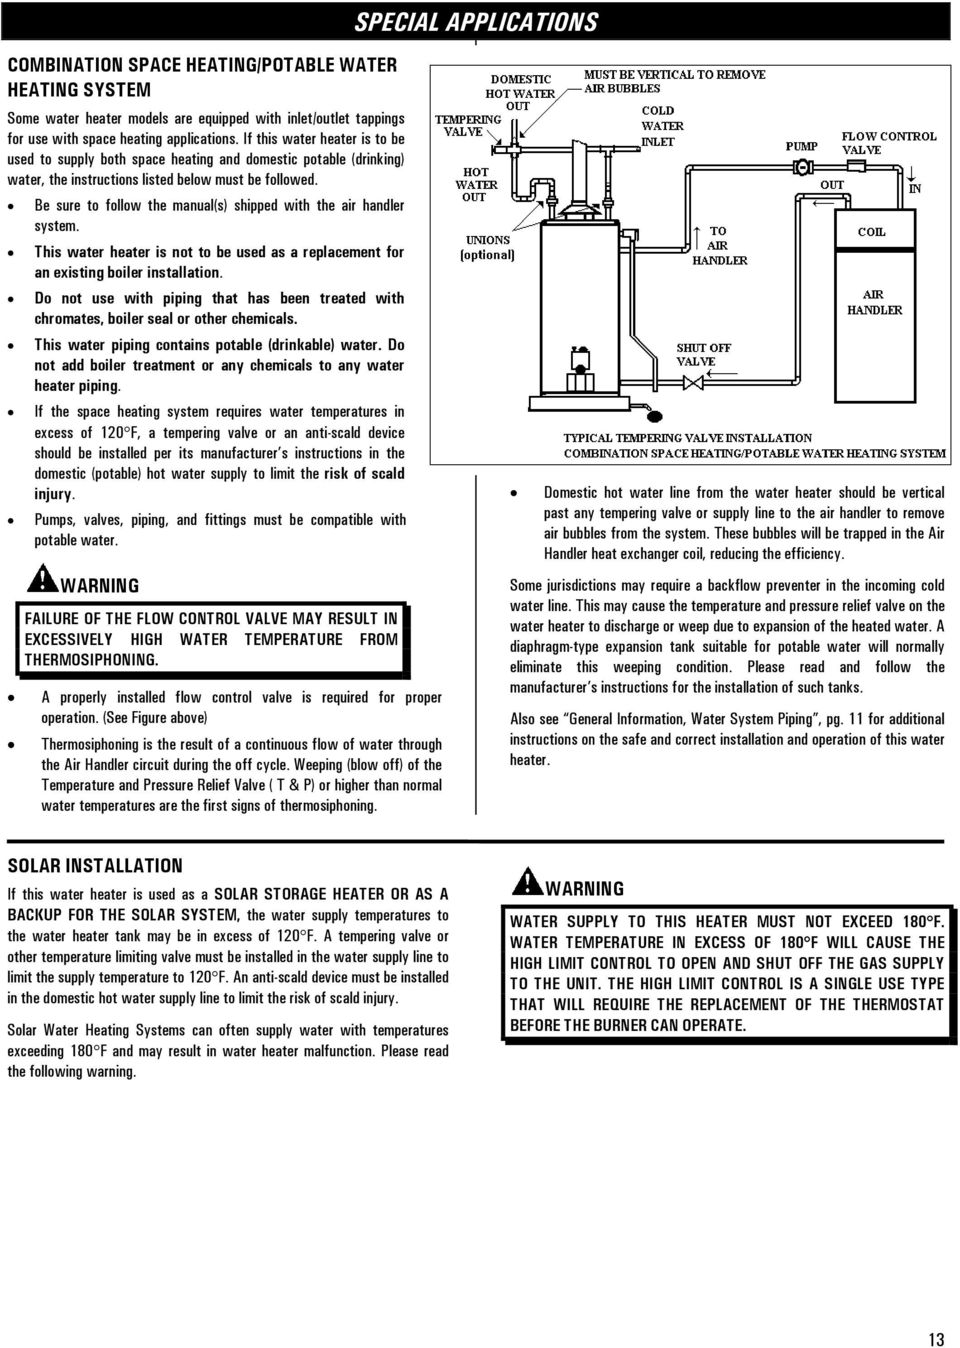 Be sure to follow the manual(s) shipped with the air handler system. This water heater is not to be used as a replacement for an existing boiler installation.